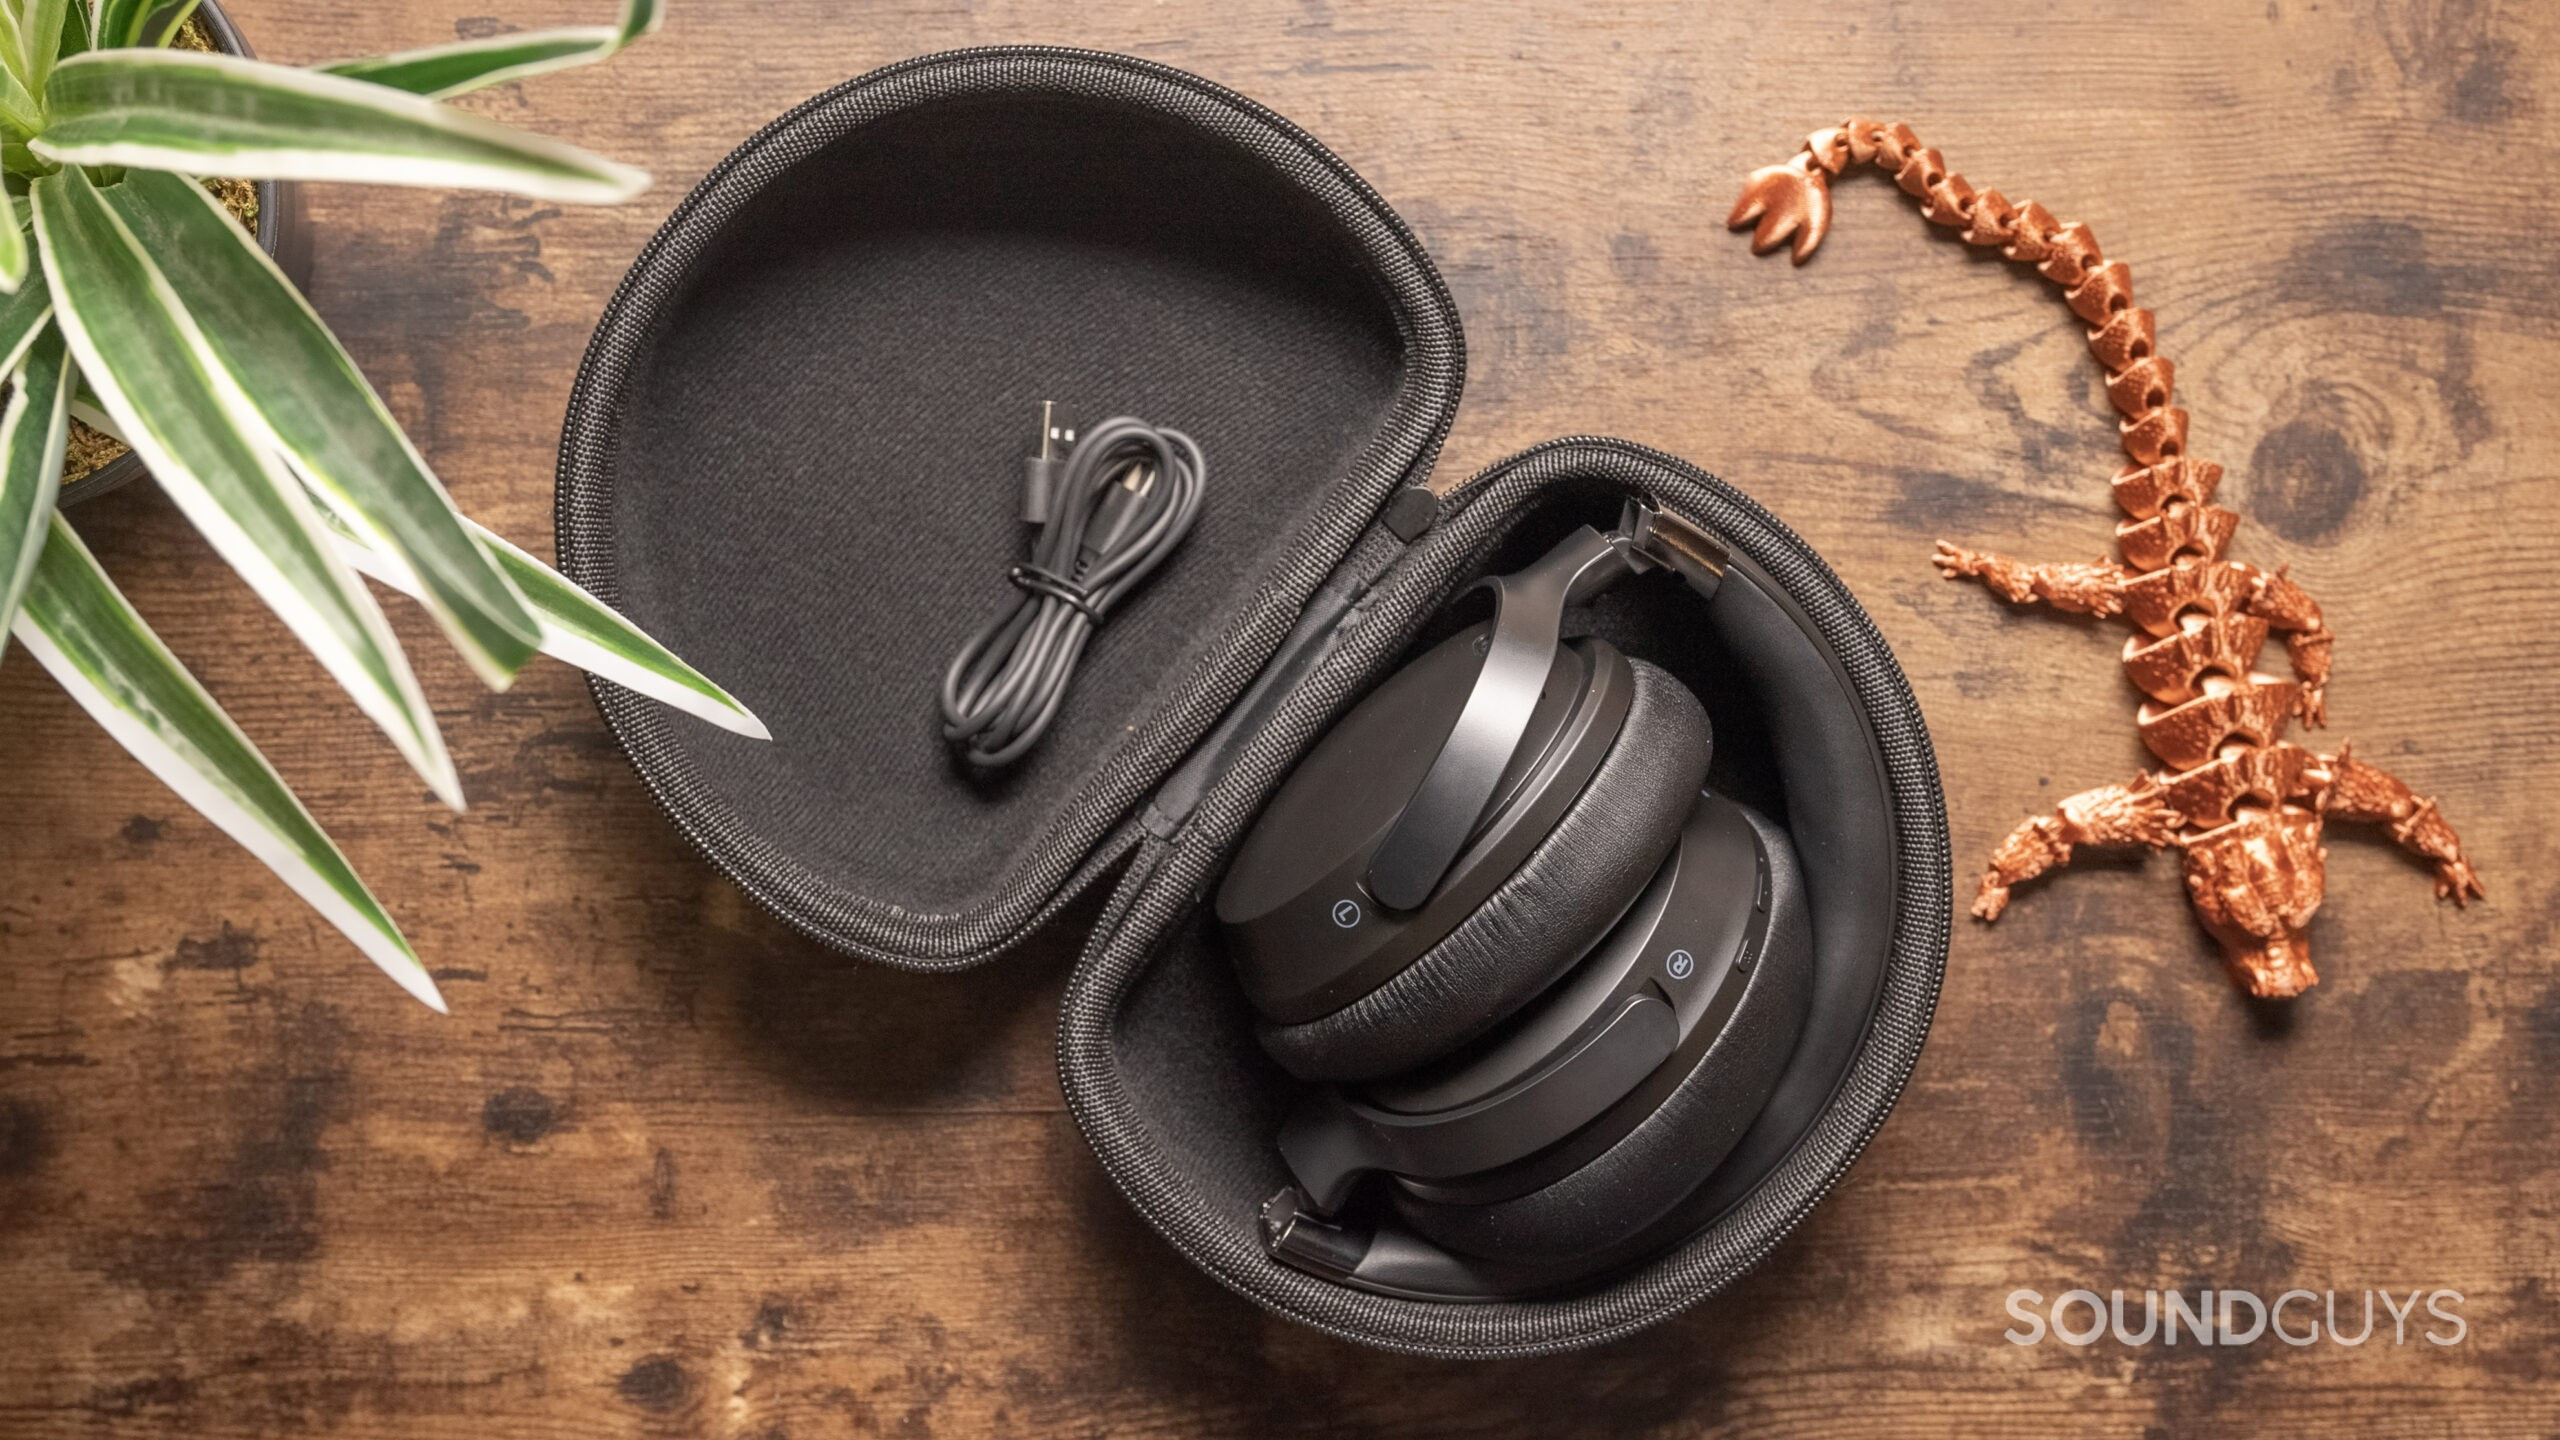 The Monoprice Dual Driver Bluetooth Headphones inside-case with cable